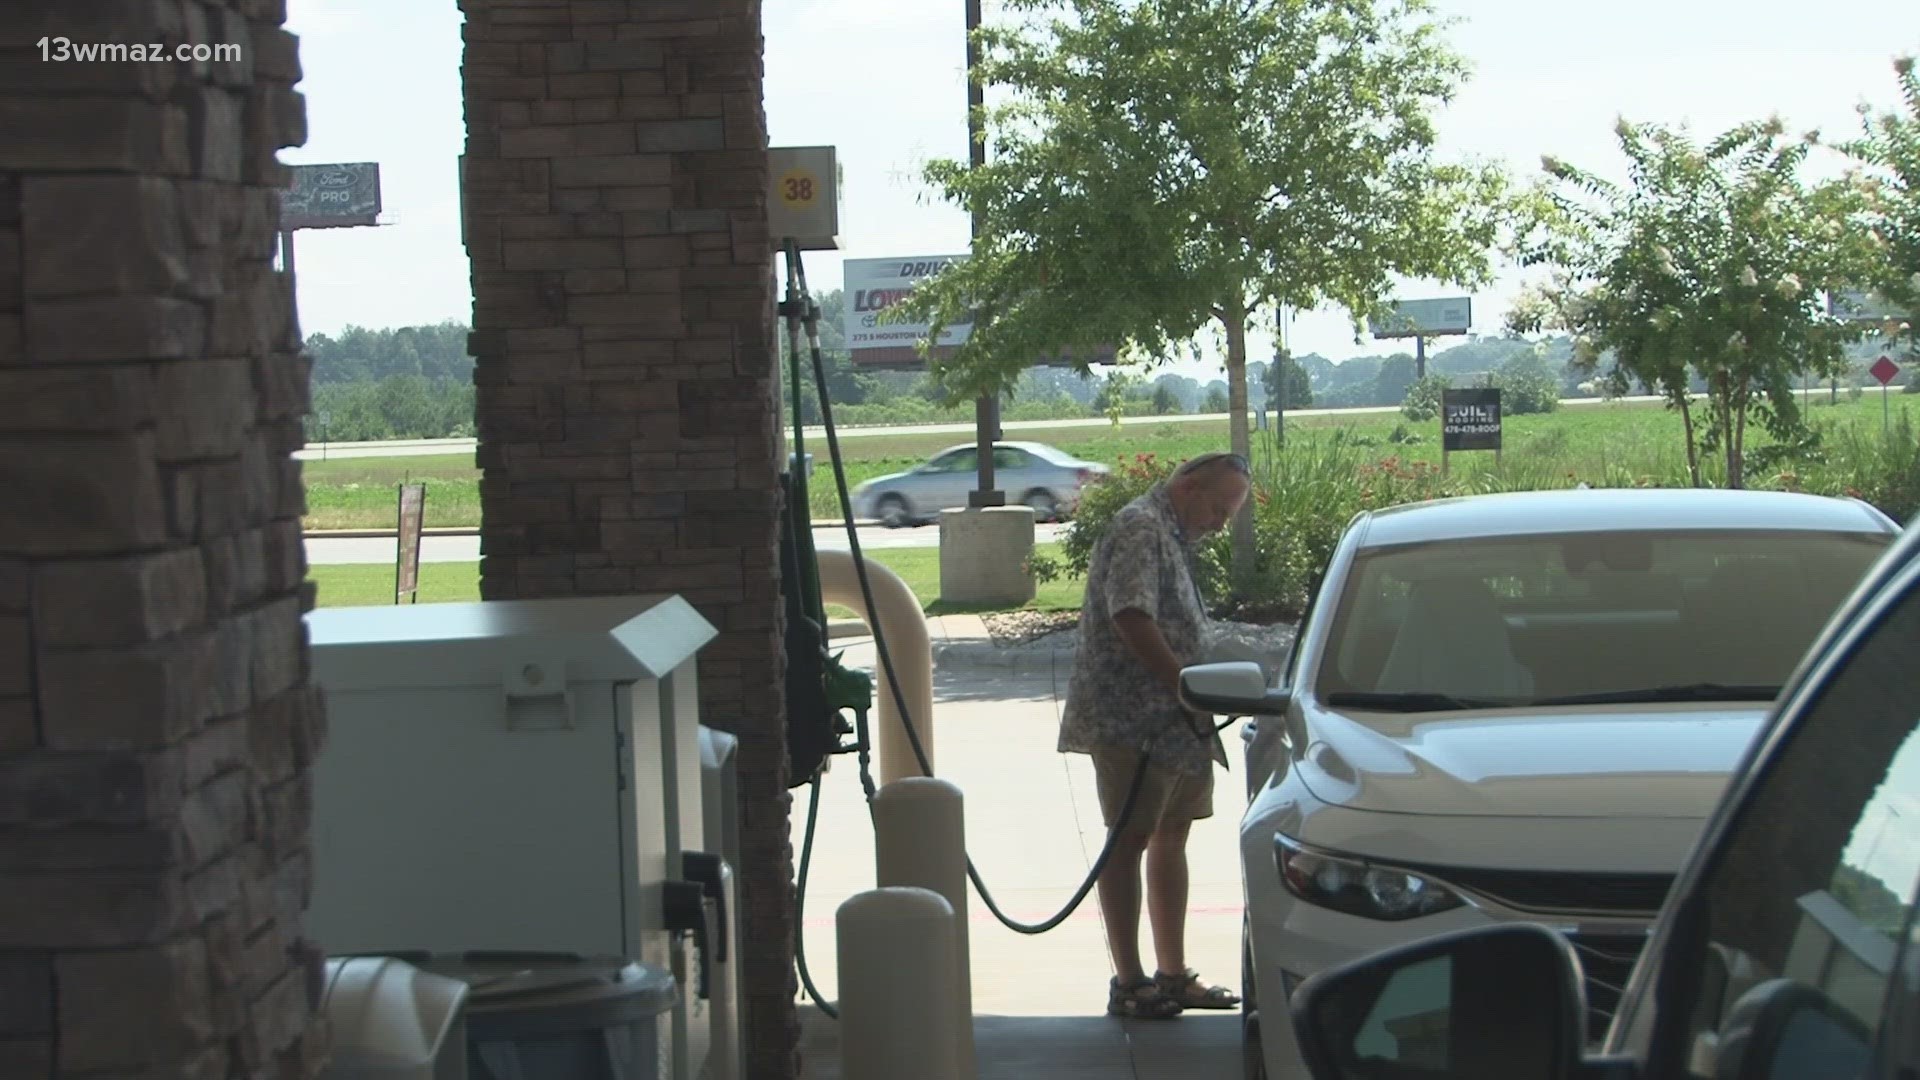 Georgia has seen the 7th largest increase in gas prices the country since Thursday after a 5-cent increase.